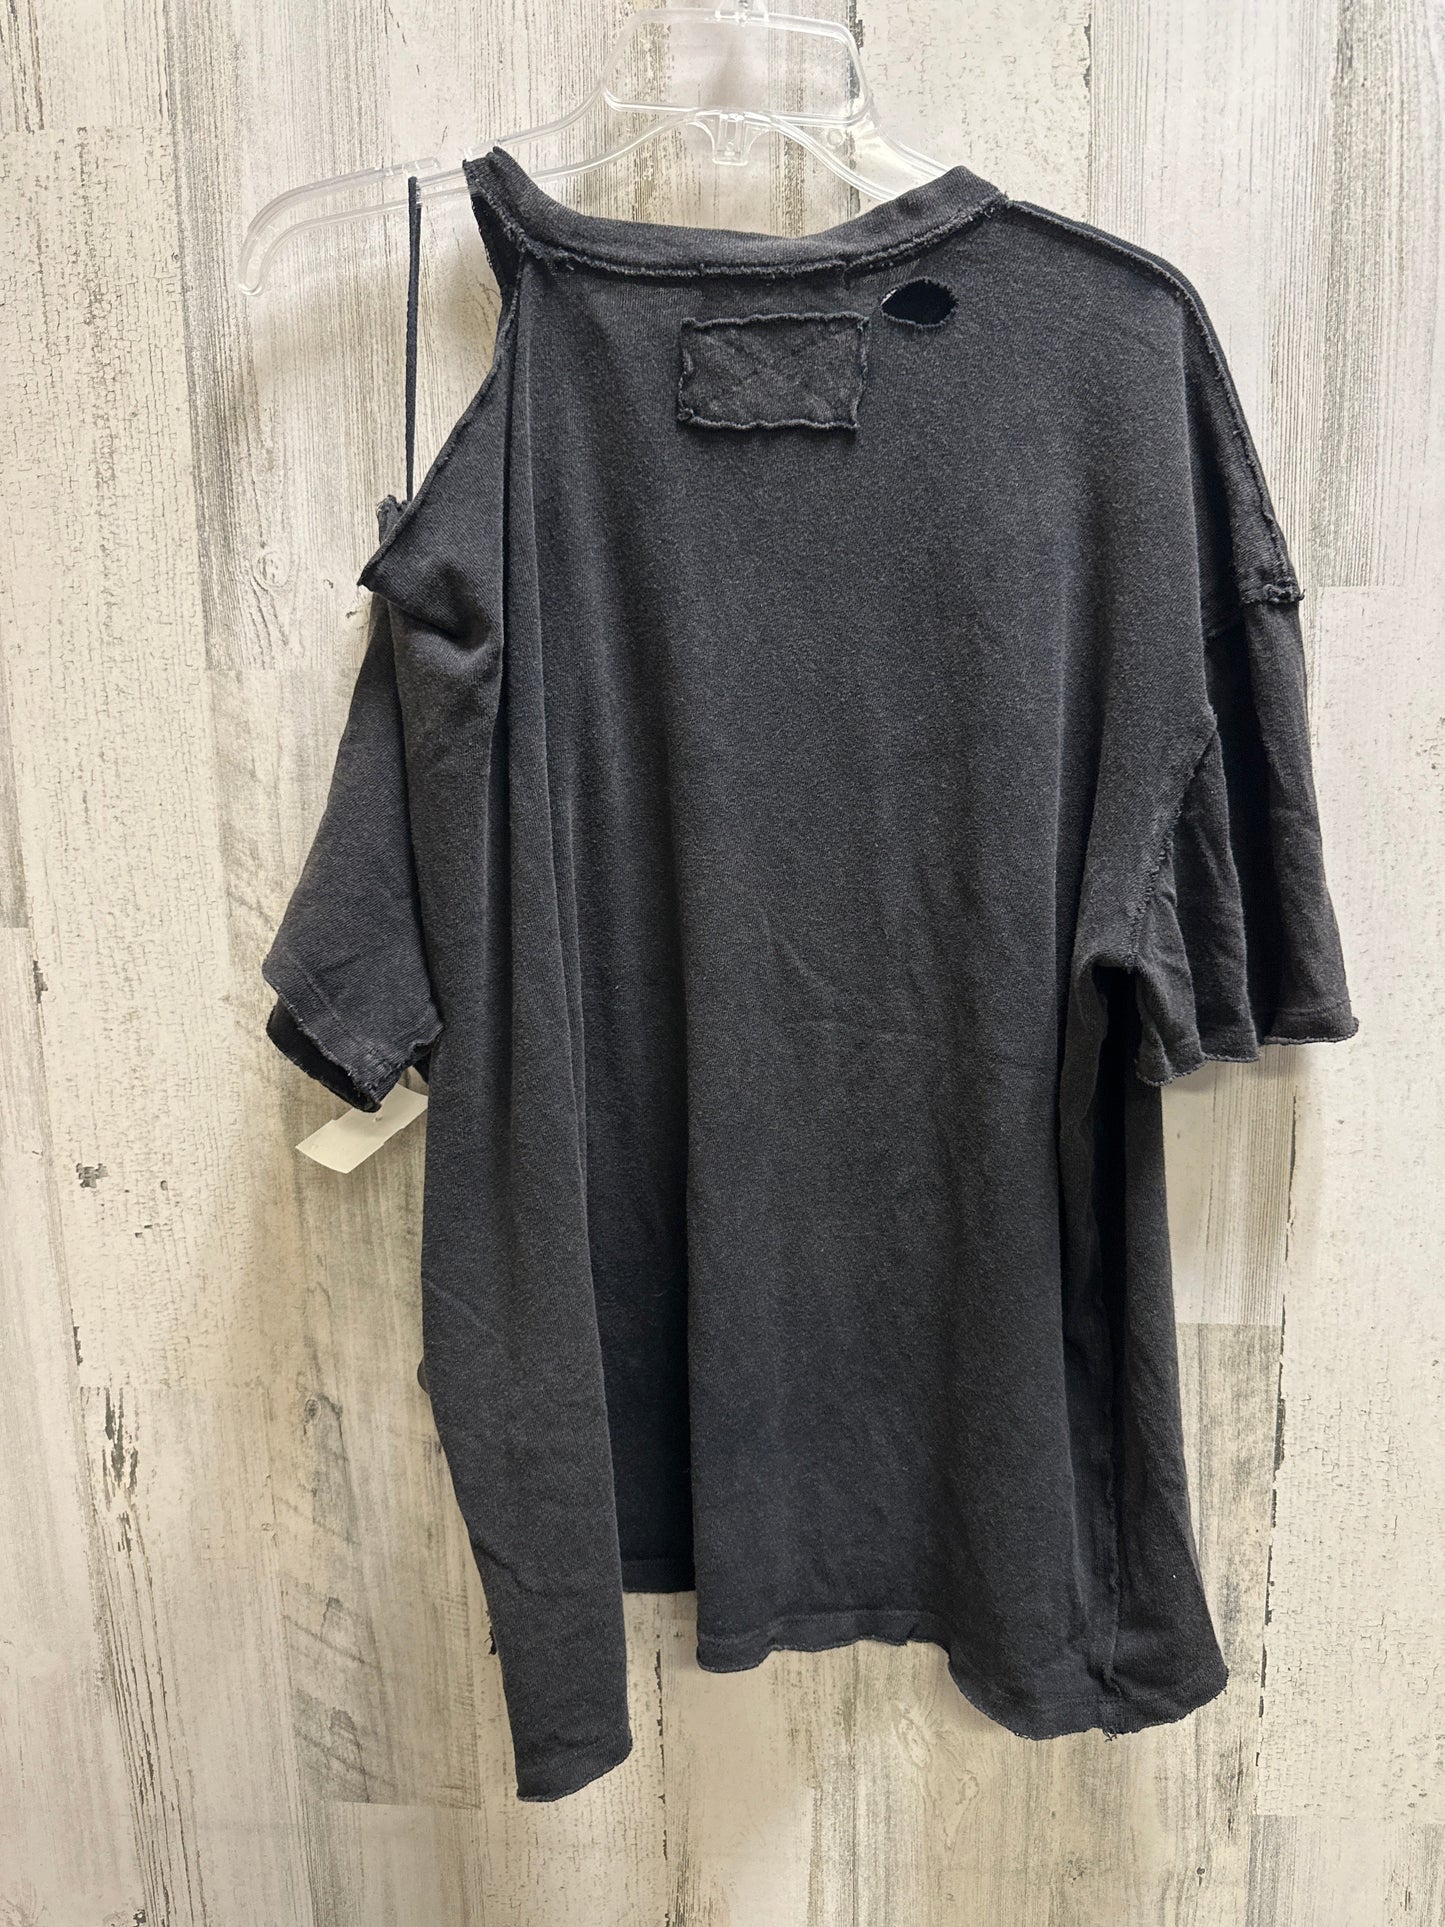 Black Top Short Sleeve Free People, Size S